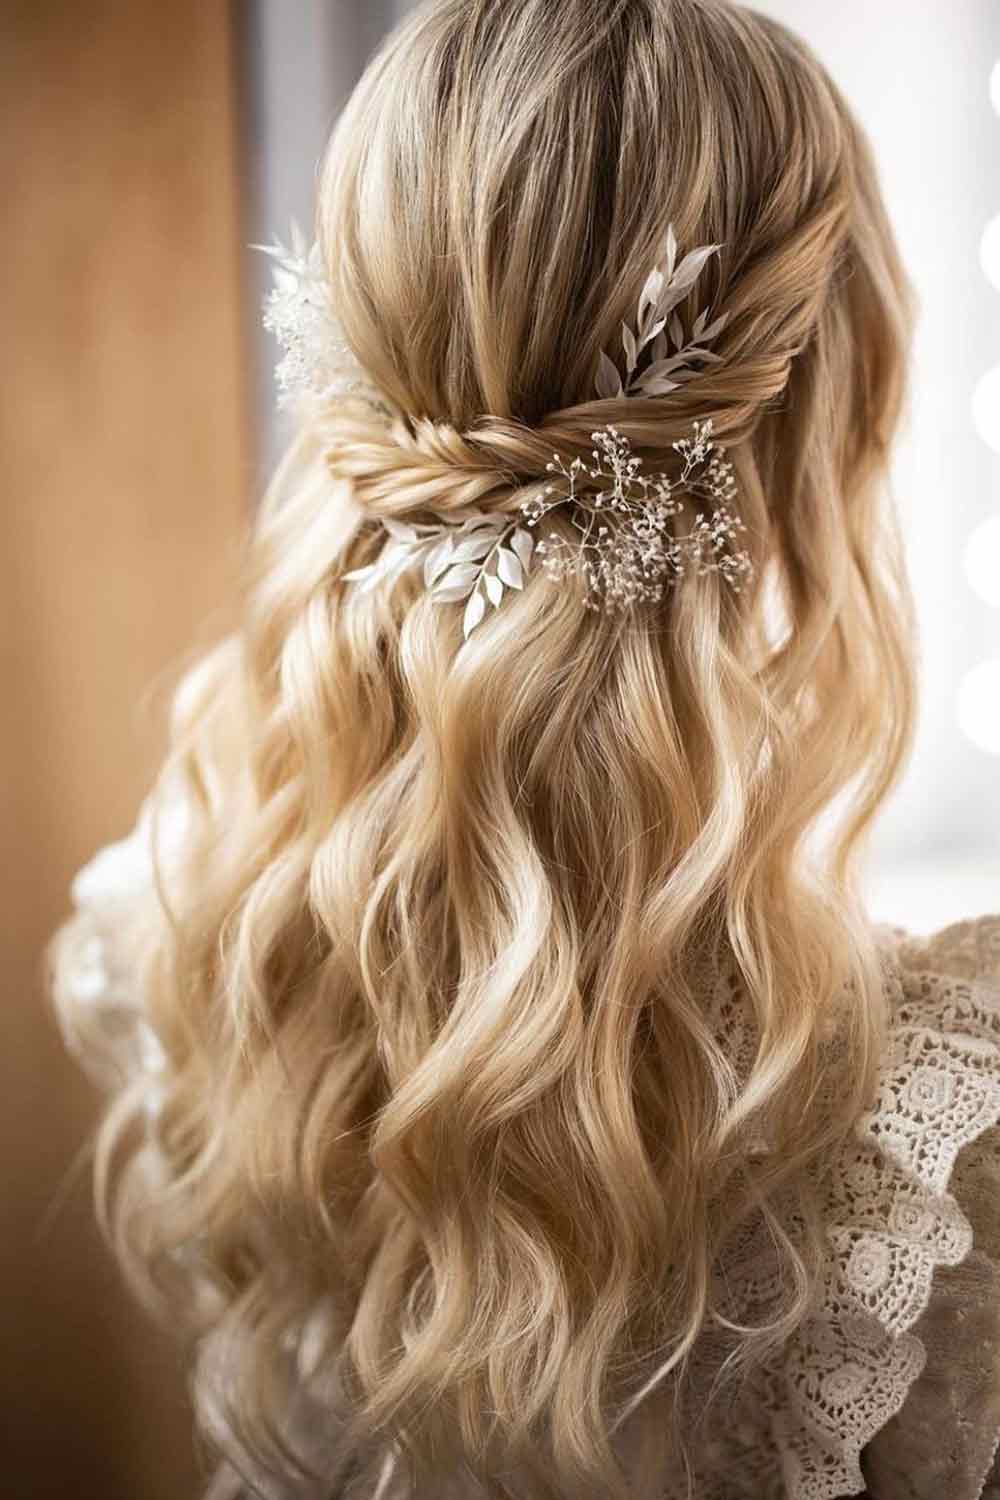 Half Up Half Down Hairstyle with Braid and Accessories